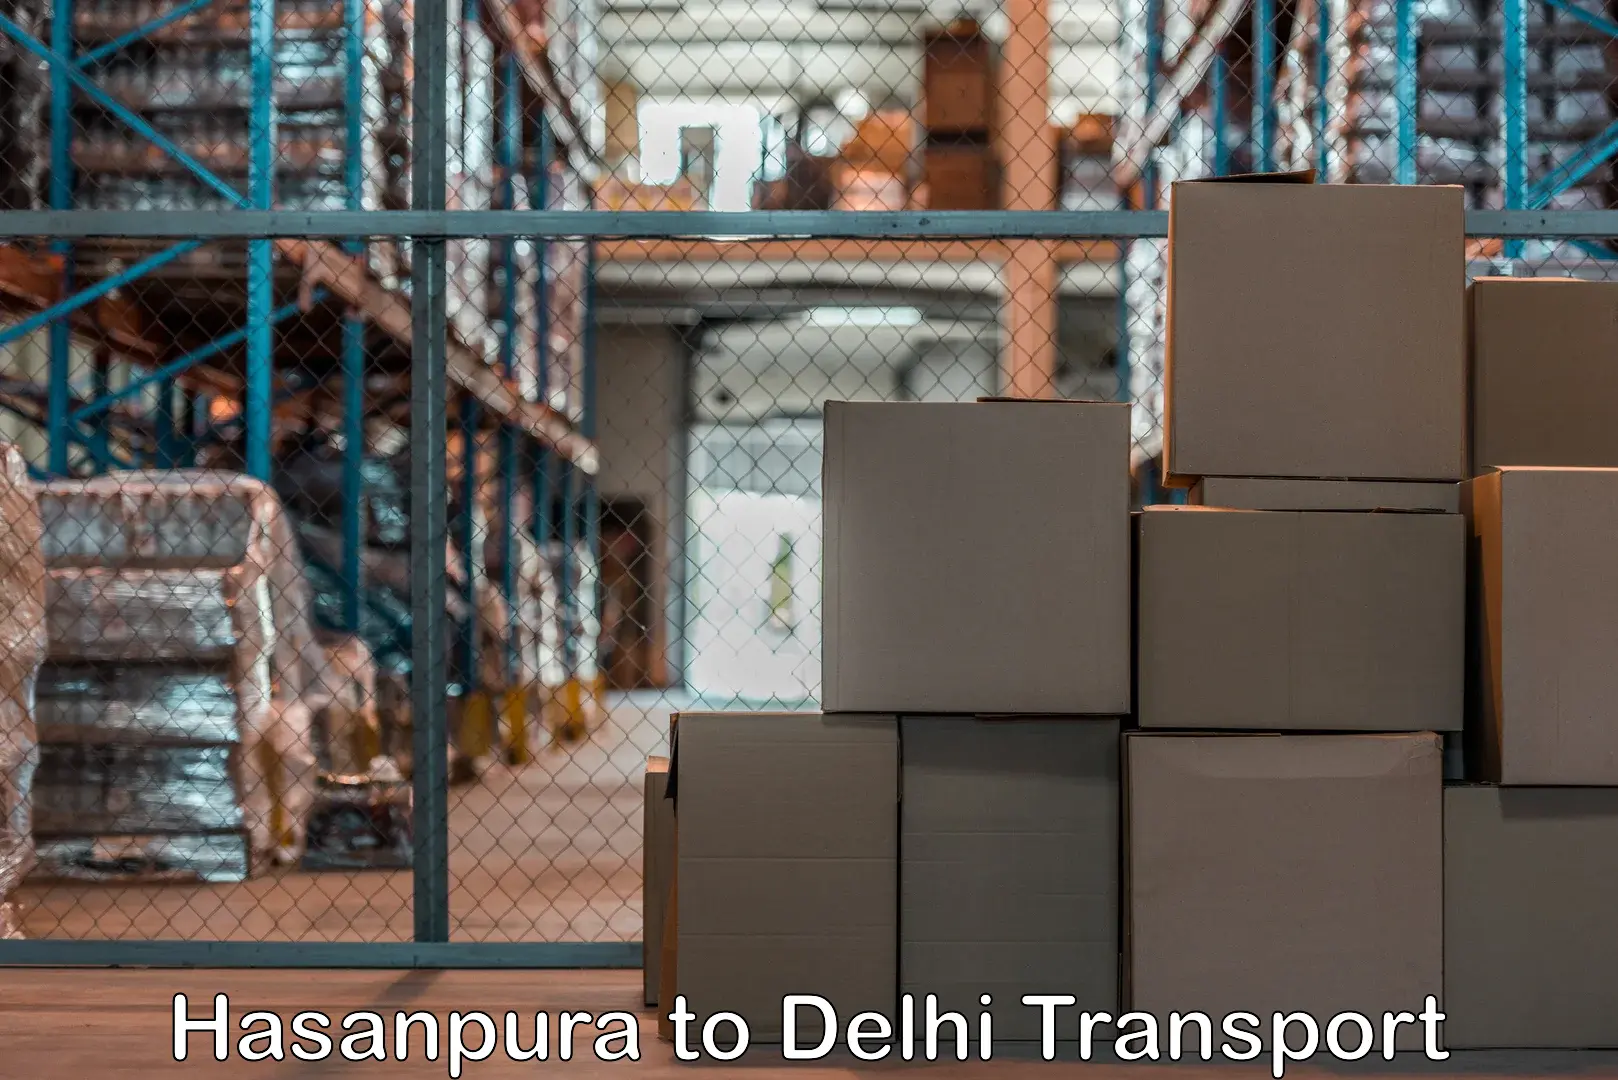 Container transport service Hasanpura to NCR